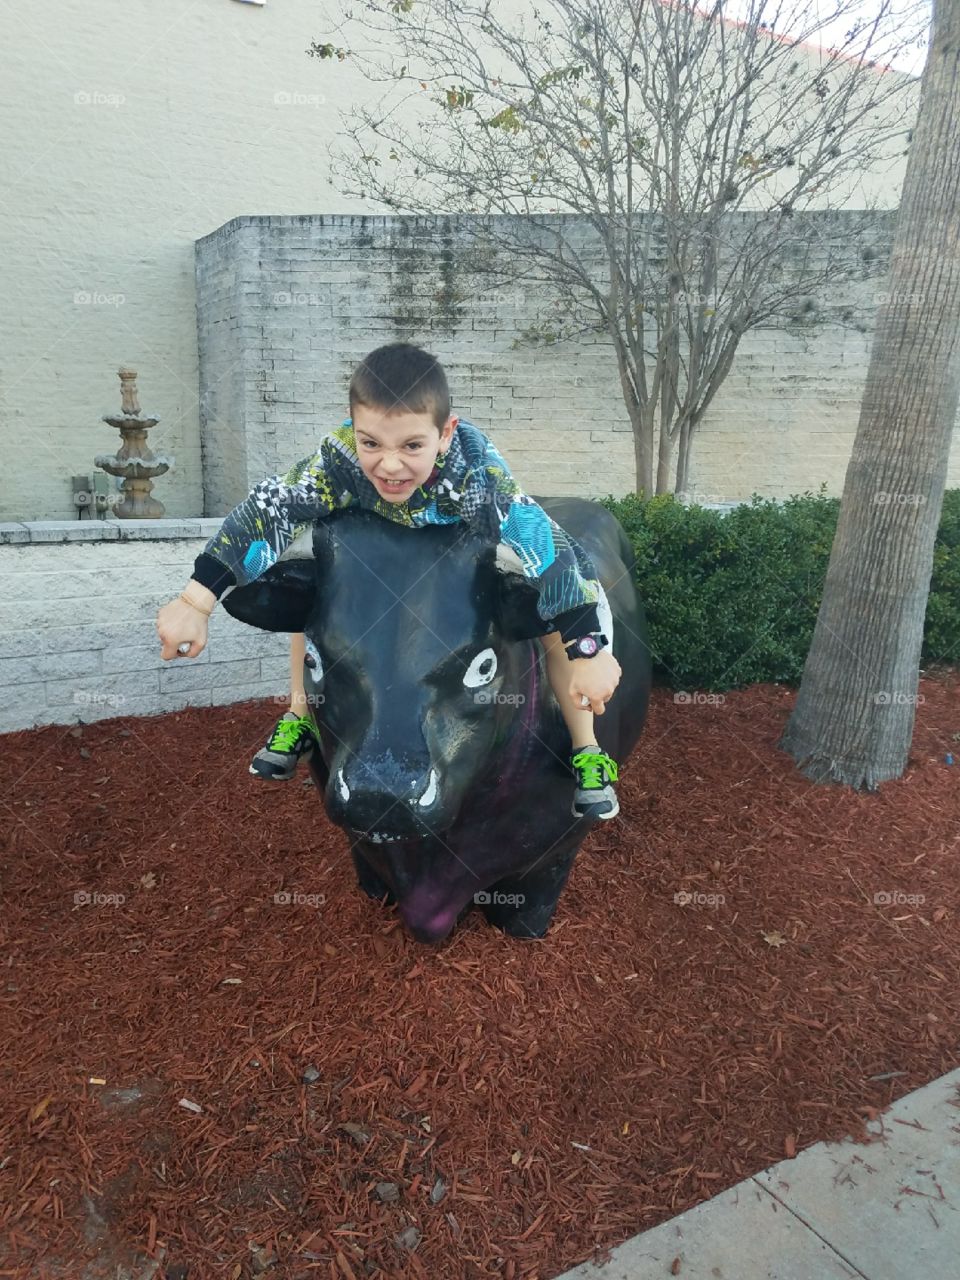 Caleb riding a bull outside the mall he’s holding on tight what a cowboy!!!!